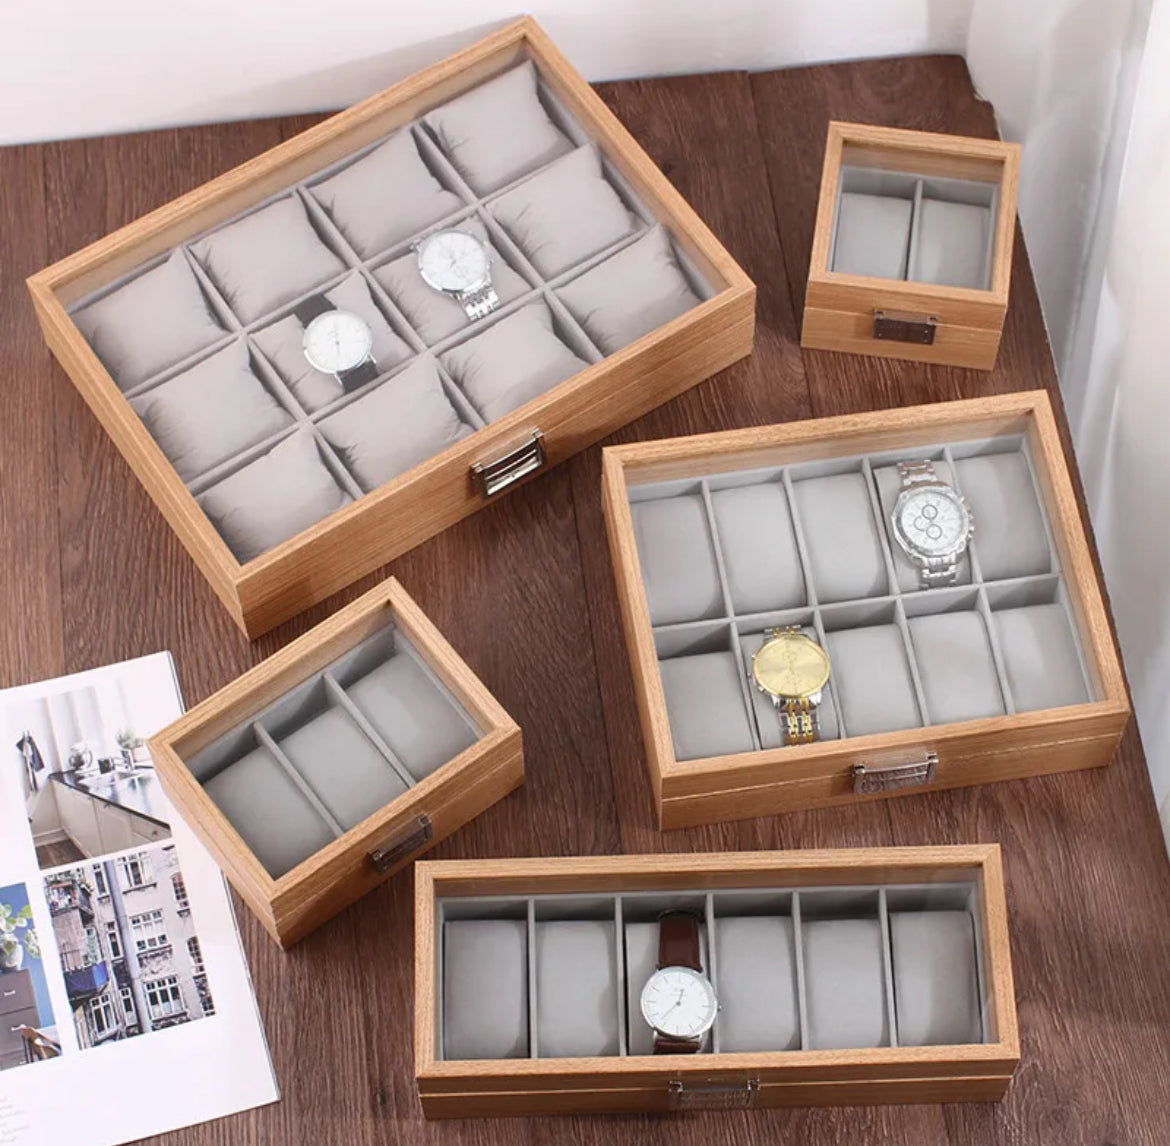 3 Slot Laminate Wood Watch Storage Box (Bamboo Colour)/Watch Box Holder/Case/Organiser with Display Glass